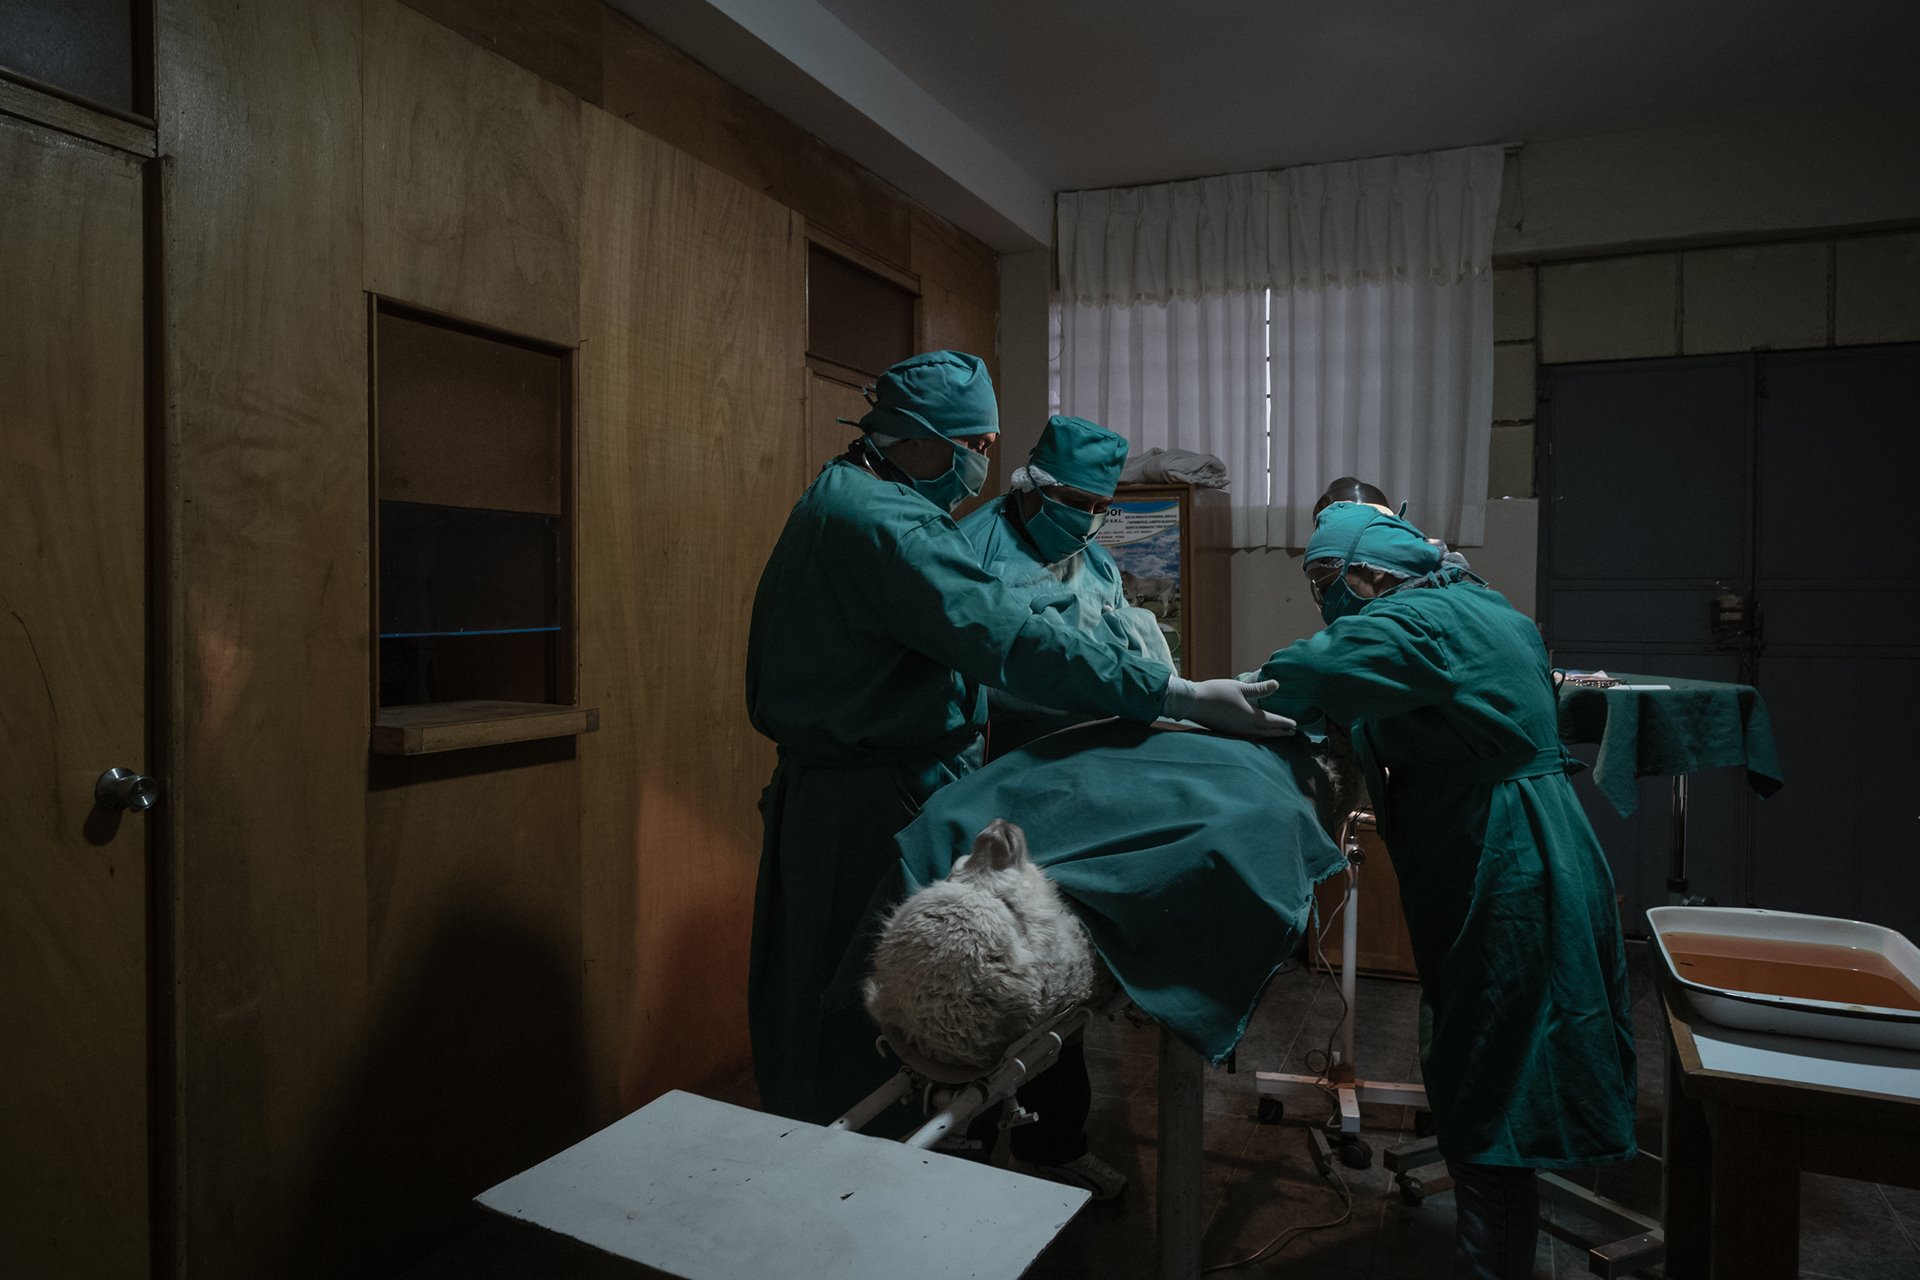 <p>A medical team prepares an alpaca for surgery to retrieve eggs for in vitro fertilization, at Quimsachata Research and Production Center, in Puno, Peru. The center houses the largest genetic reserve of alpaca breeds in the world.</p>
